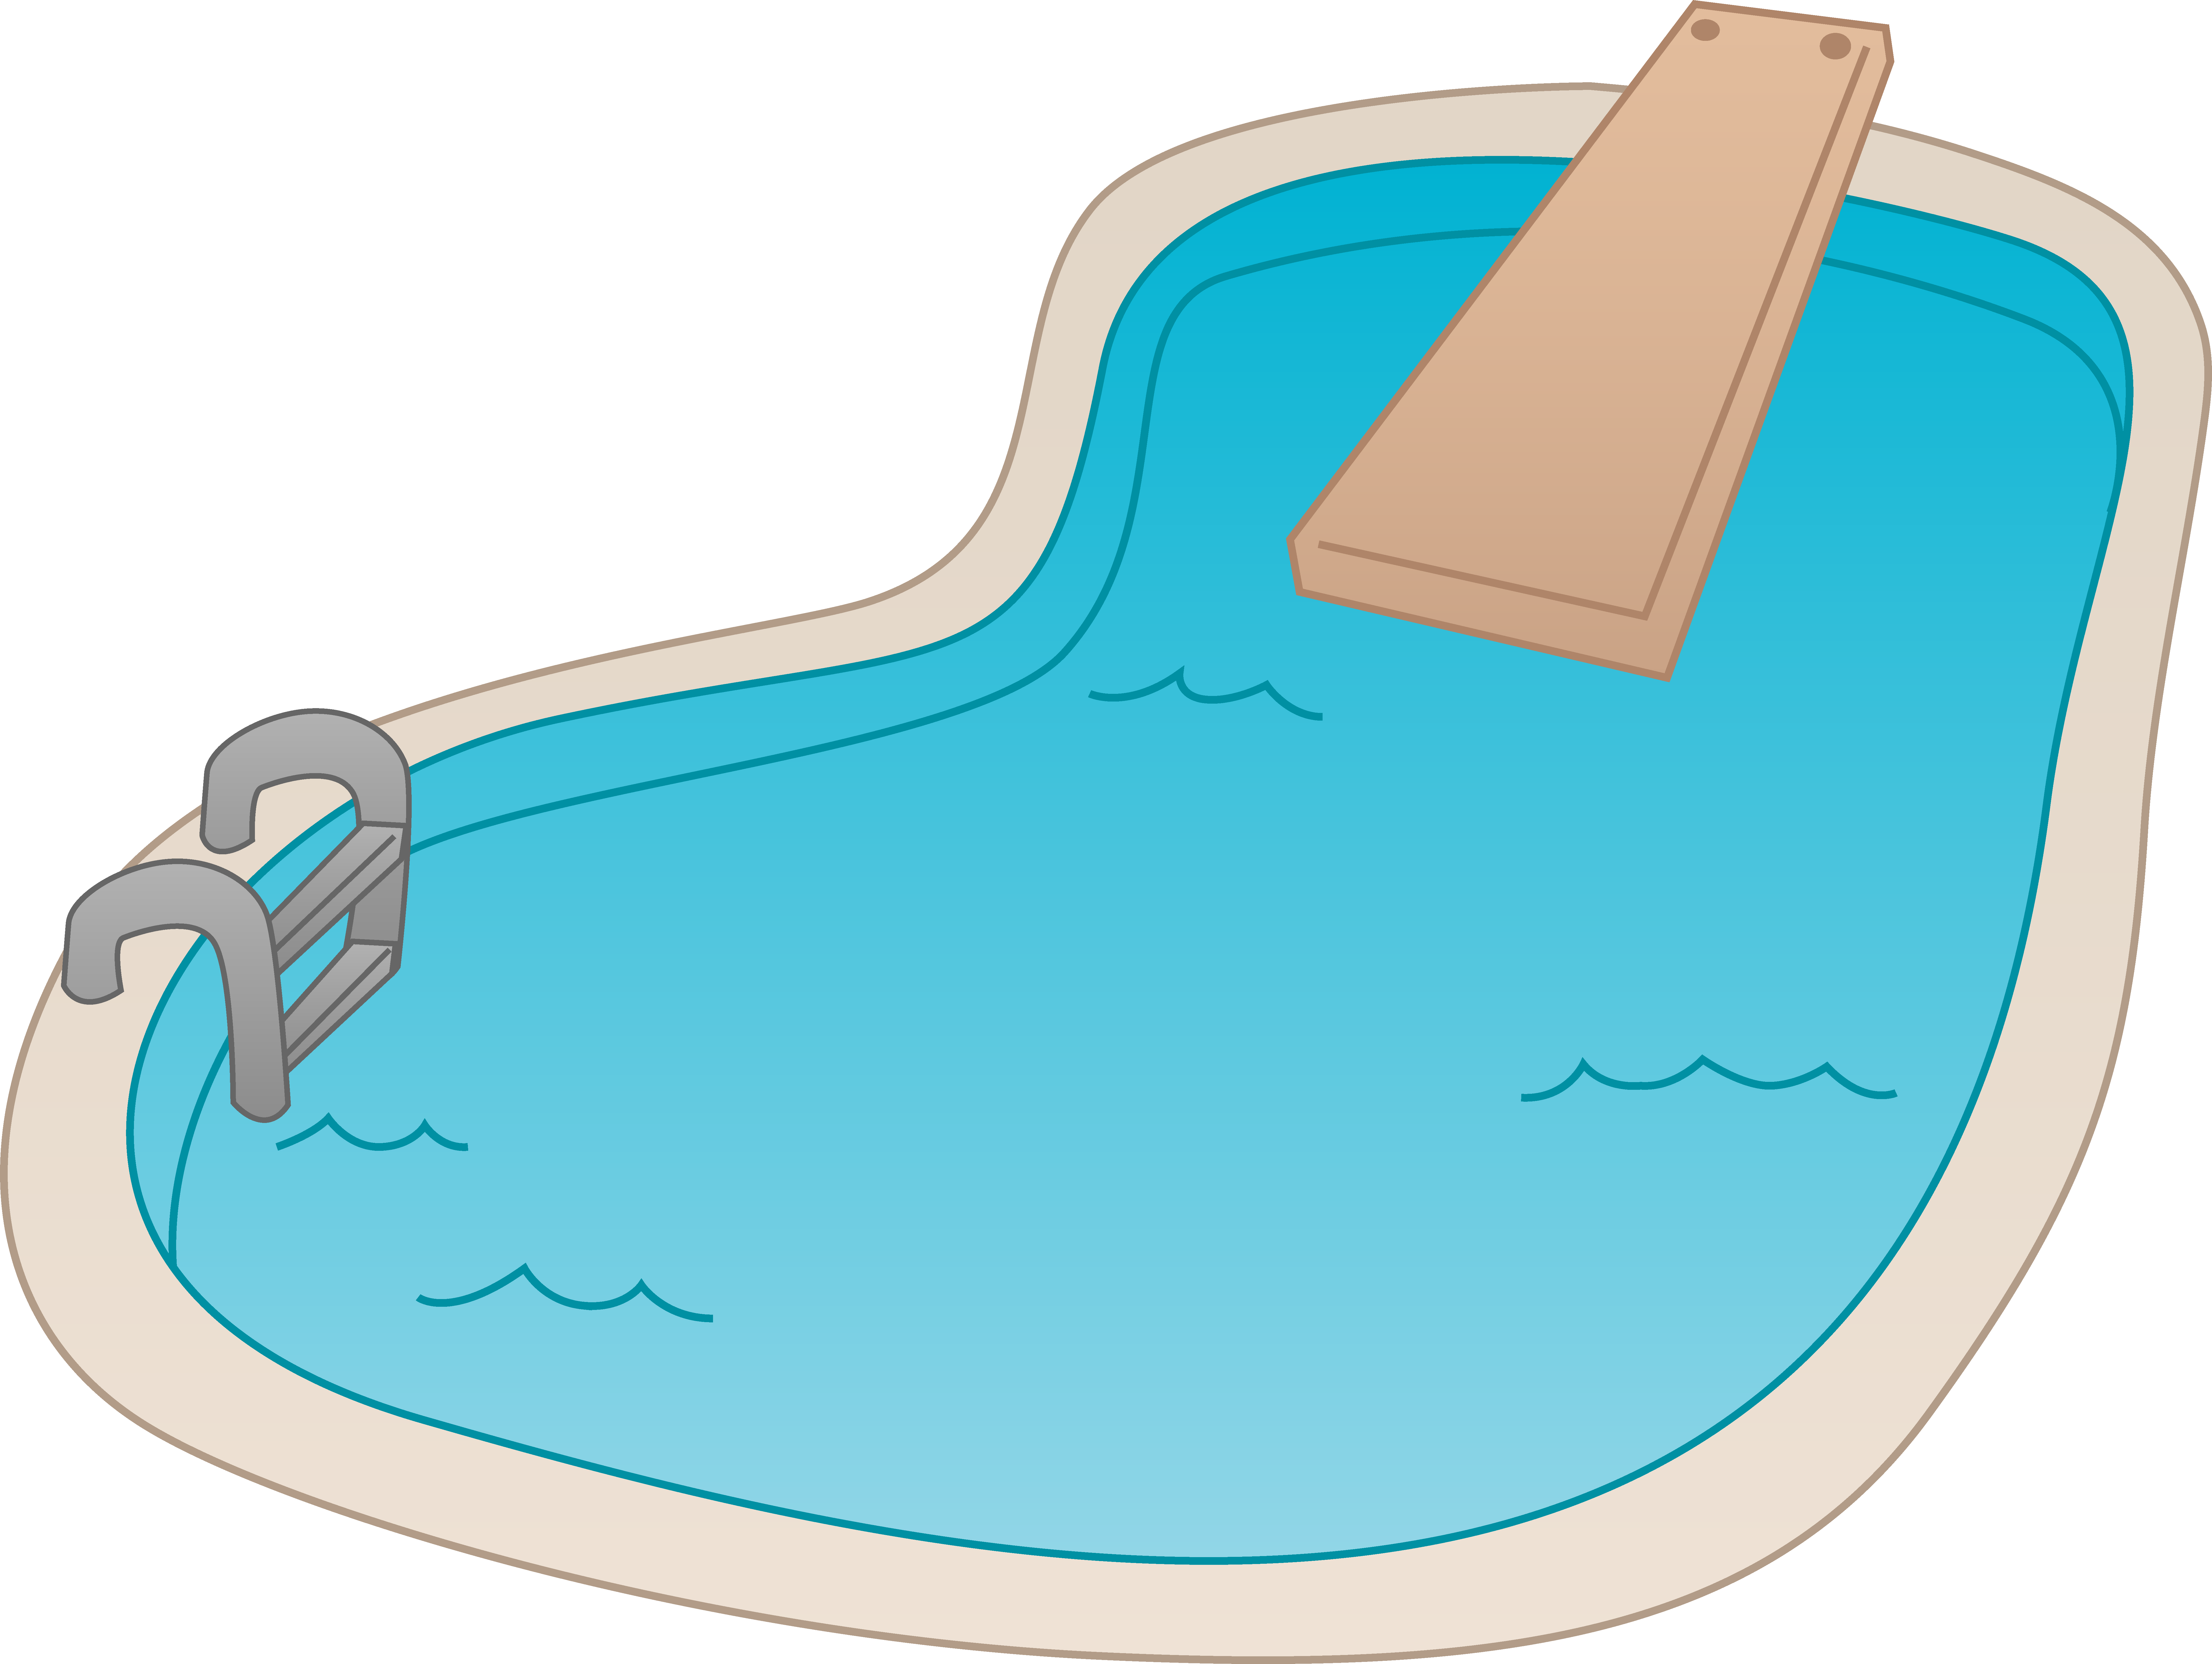 Swimming Pool Cartoon Imagesswimming Pool With Diving Board Free ...